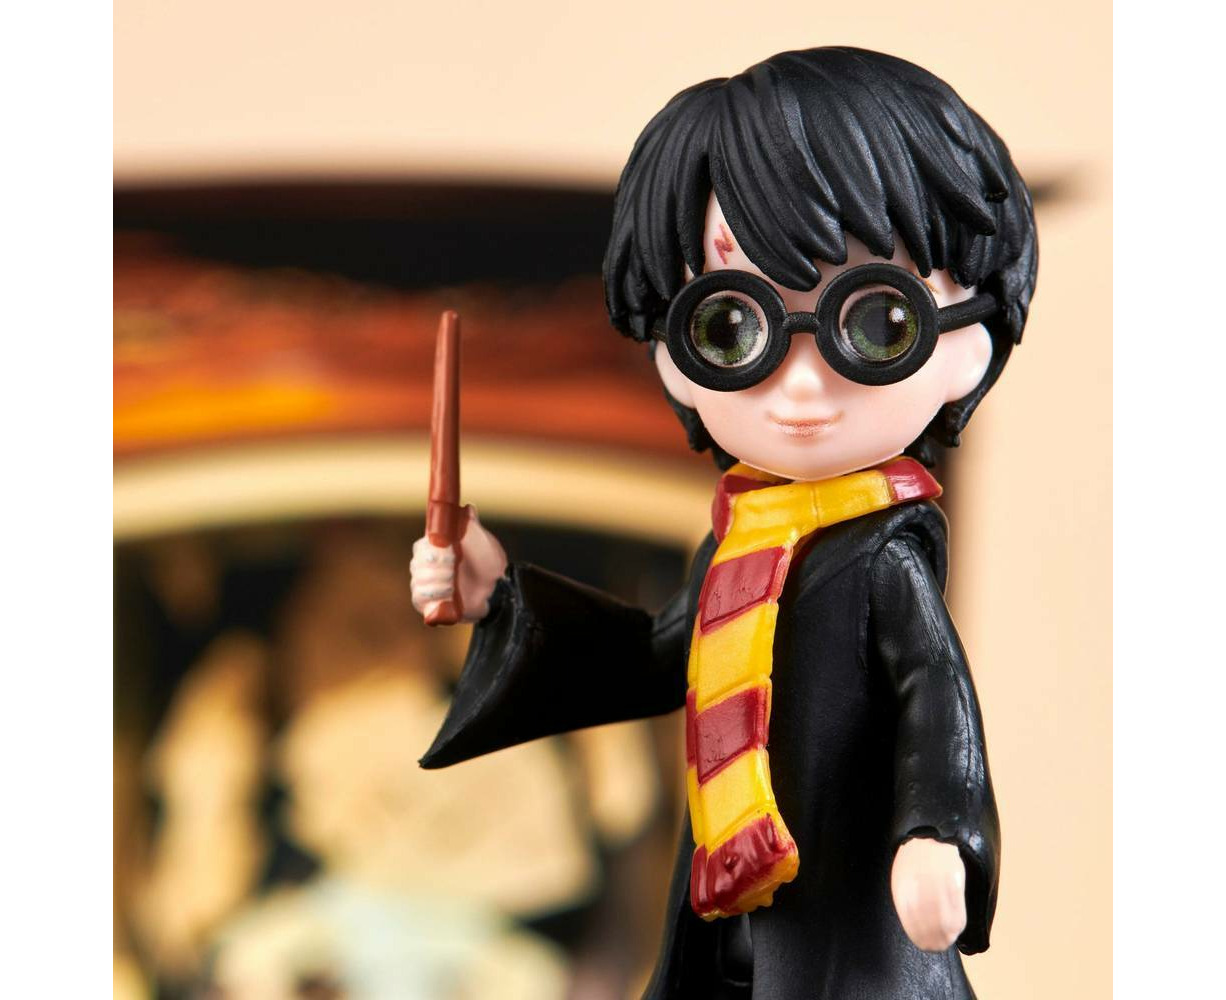 Wizarding World Harry Potter, Magical Minis Collector Set with 7  Collectible 3-inch Toy Figures, Kids Toys for Ages 5 and Up